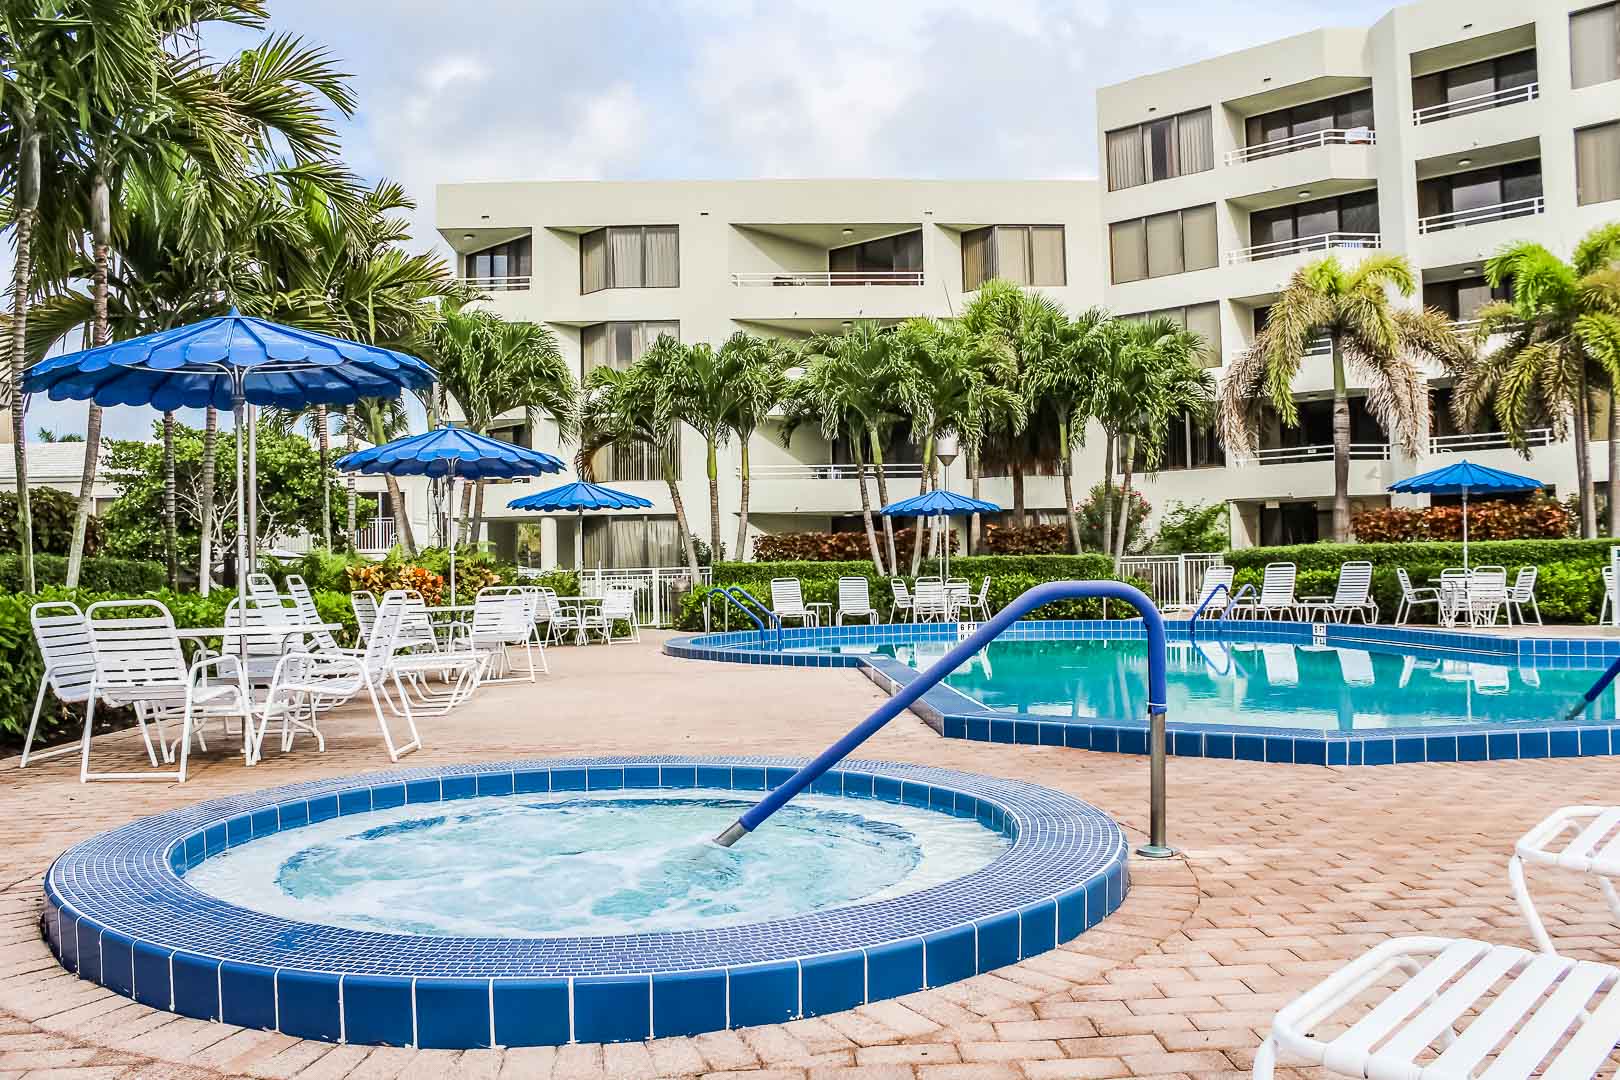 A relaxing Pool and Jacuzzi at VRI's Berkshire by the Sea in Florida.